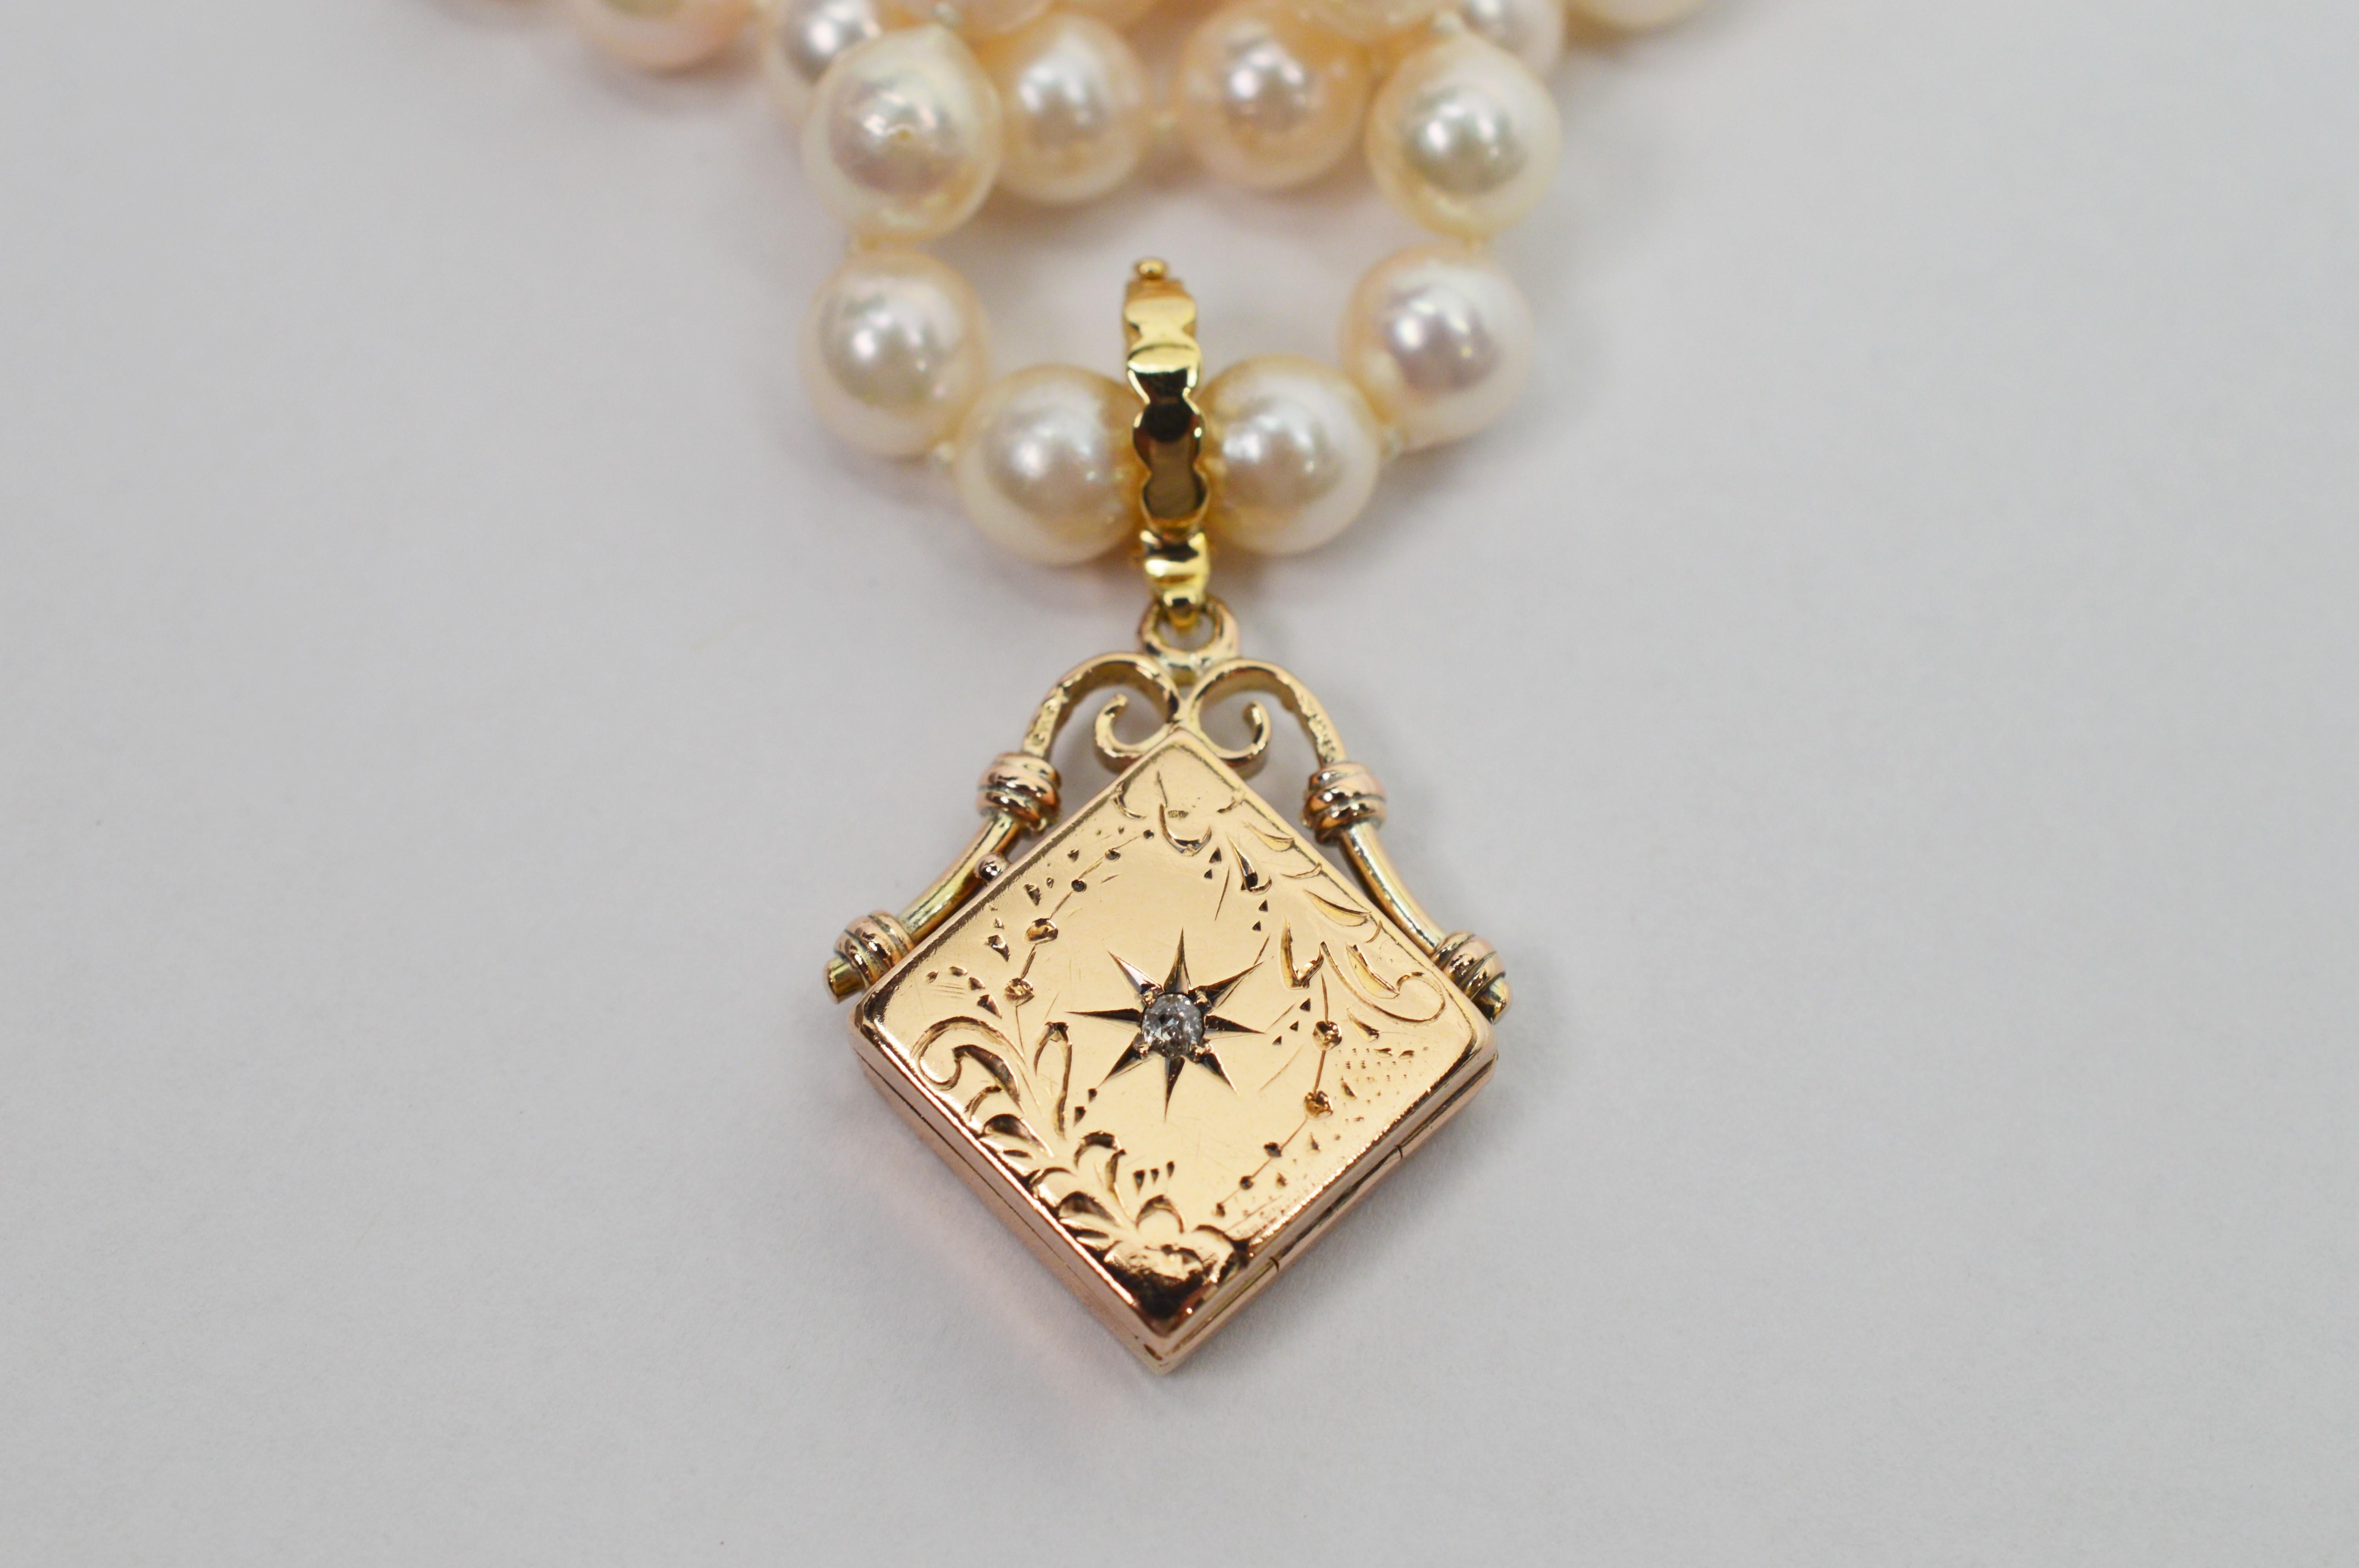 Timeless and romantic, this personalized antique fourteen karat gold charm enhancer elegantly sit as a pendant on a twenty four inch strand of creamy white 6 x 6.5 mm Akoya Pearls. The engraved charm with diamond accent is outfitted as an enhancer